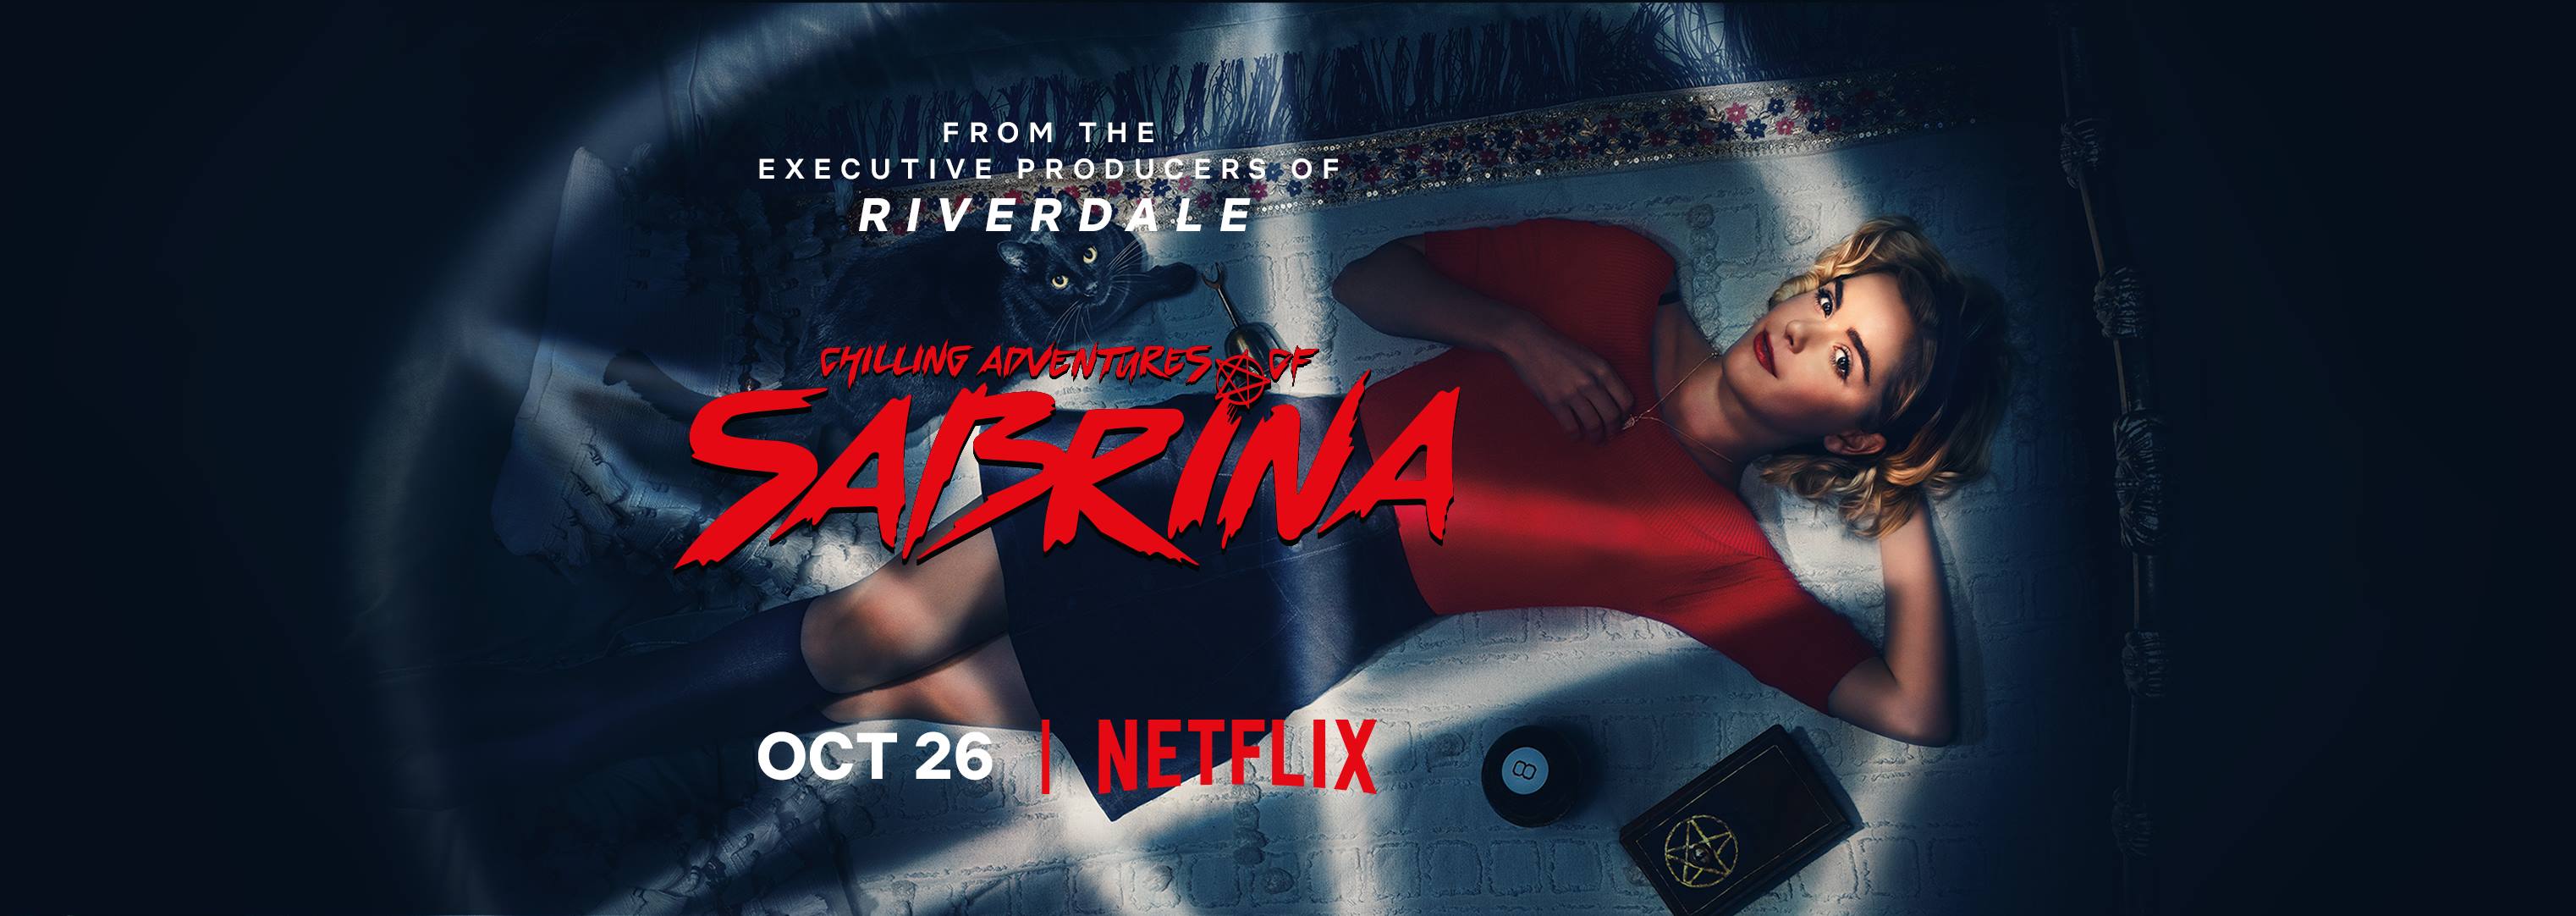 Chilling Adventures of Sabrina on Netflix Cancelled or Season 2